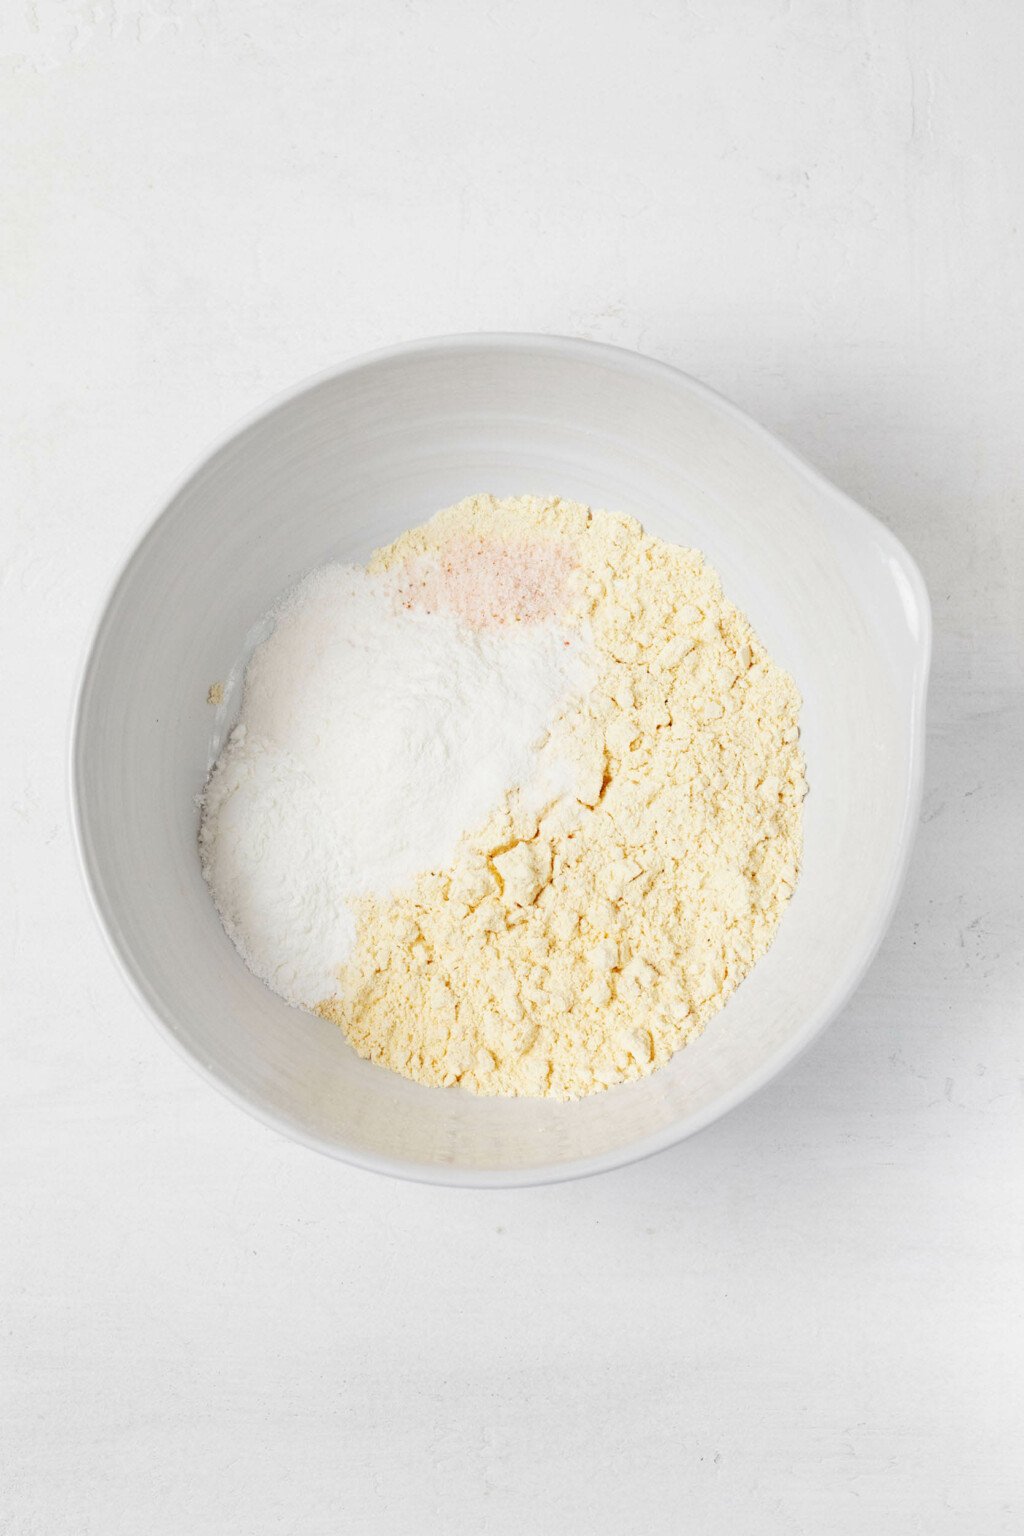 A pale yellow flour and other dry ingredients are being whisked in a mixing bowl.